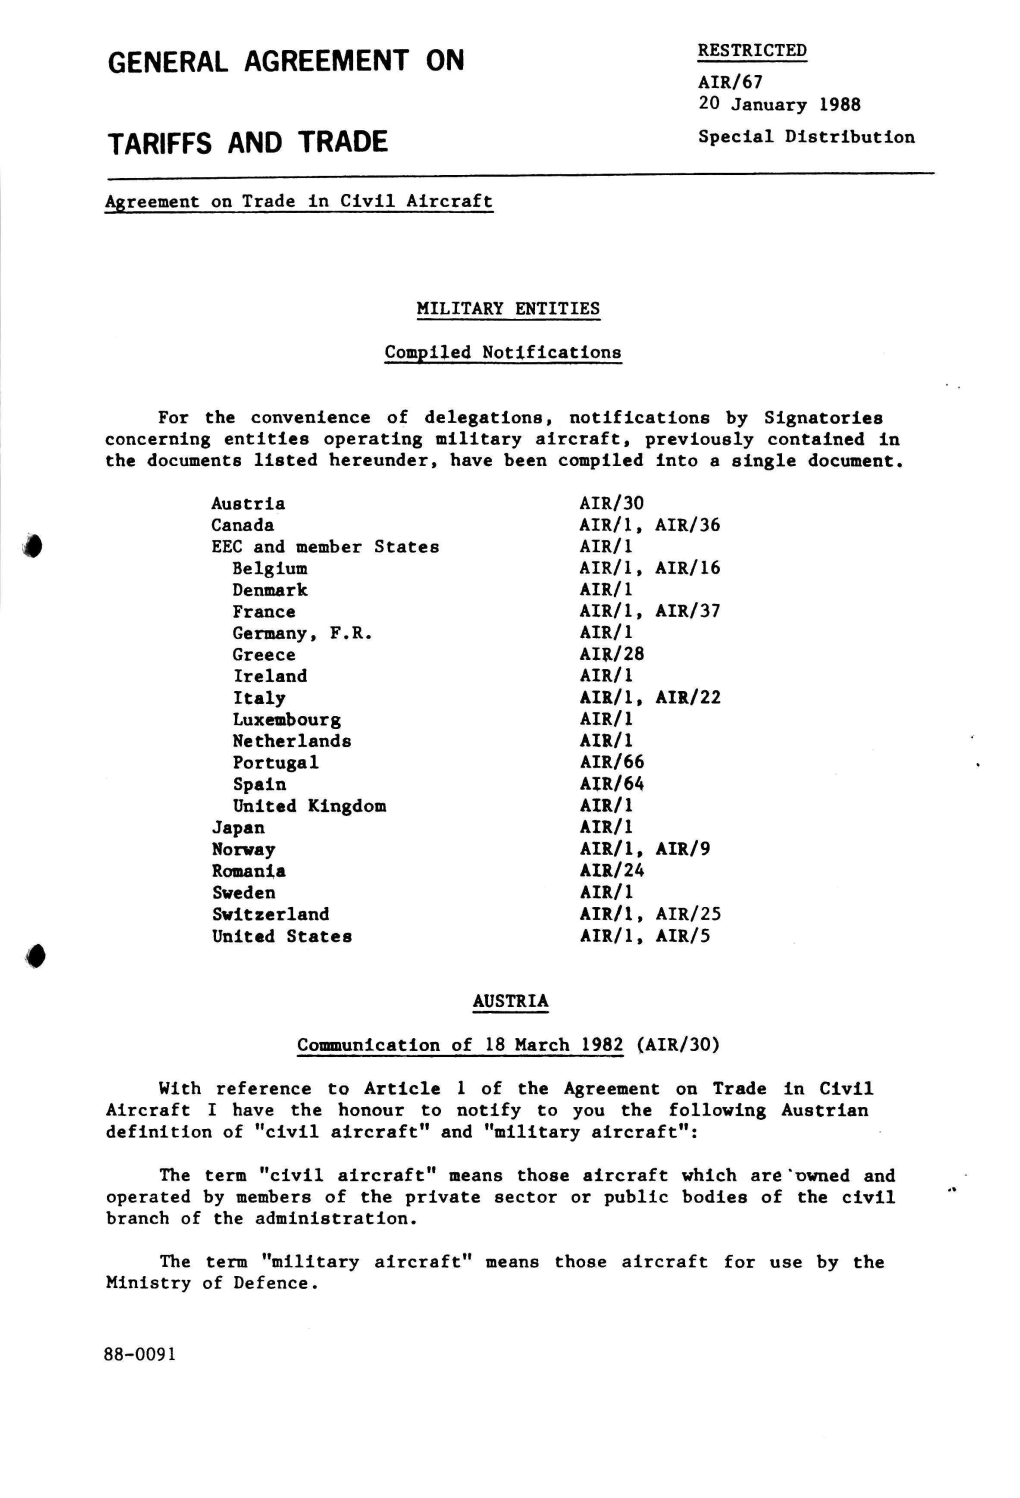 AIR/67 20 January 1988 TARIFFS and TRADE Special Distribution